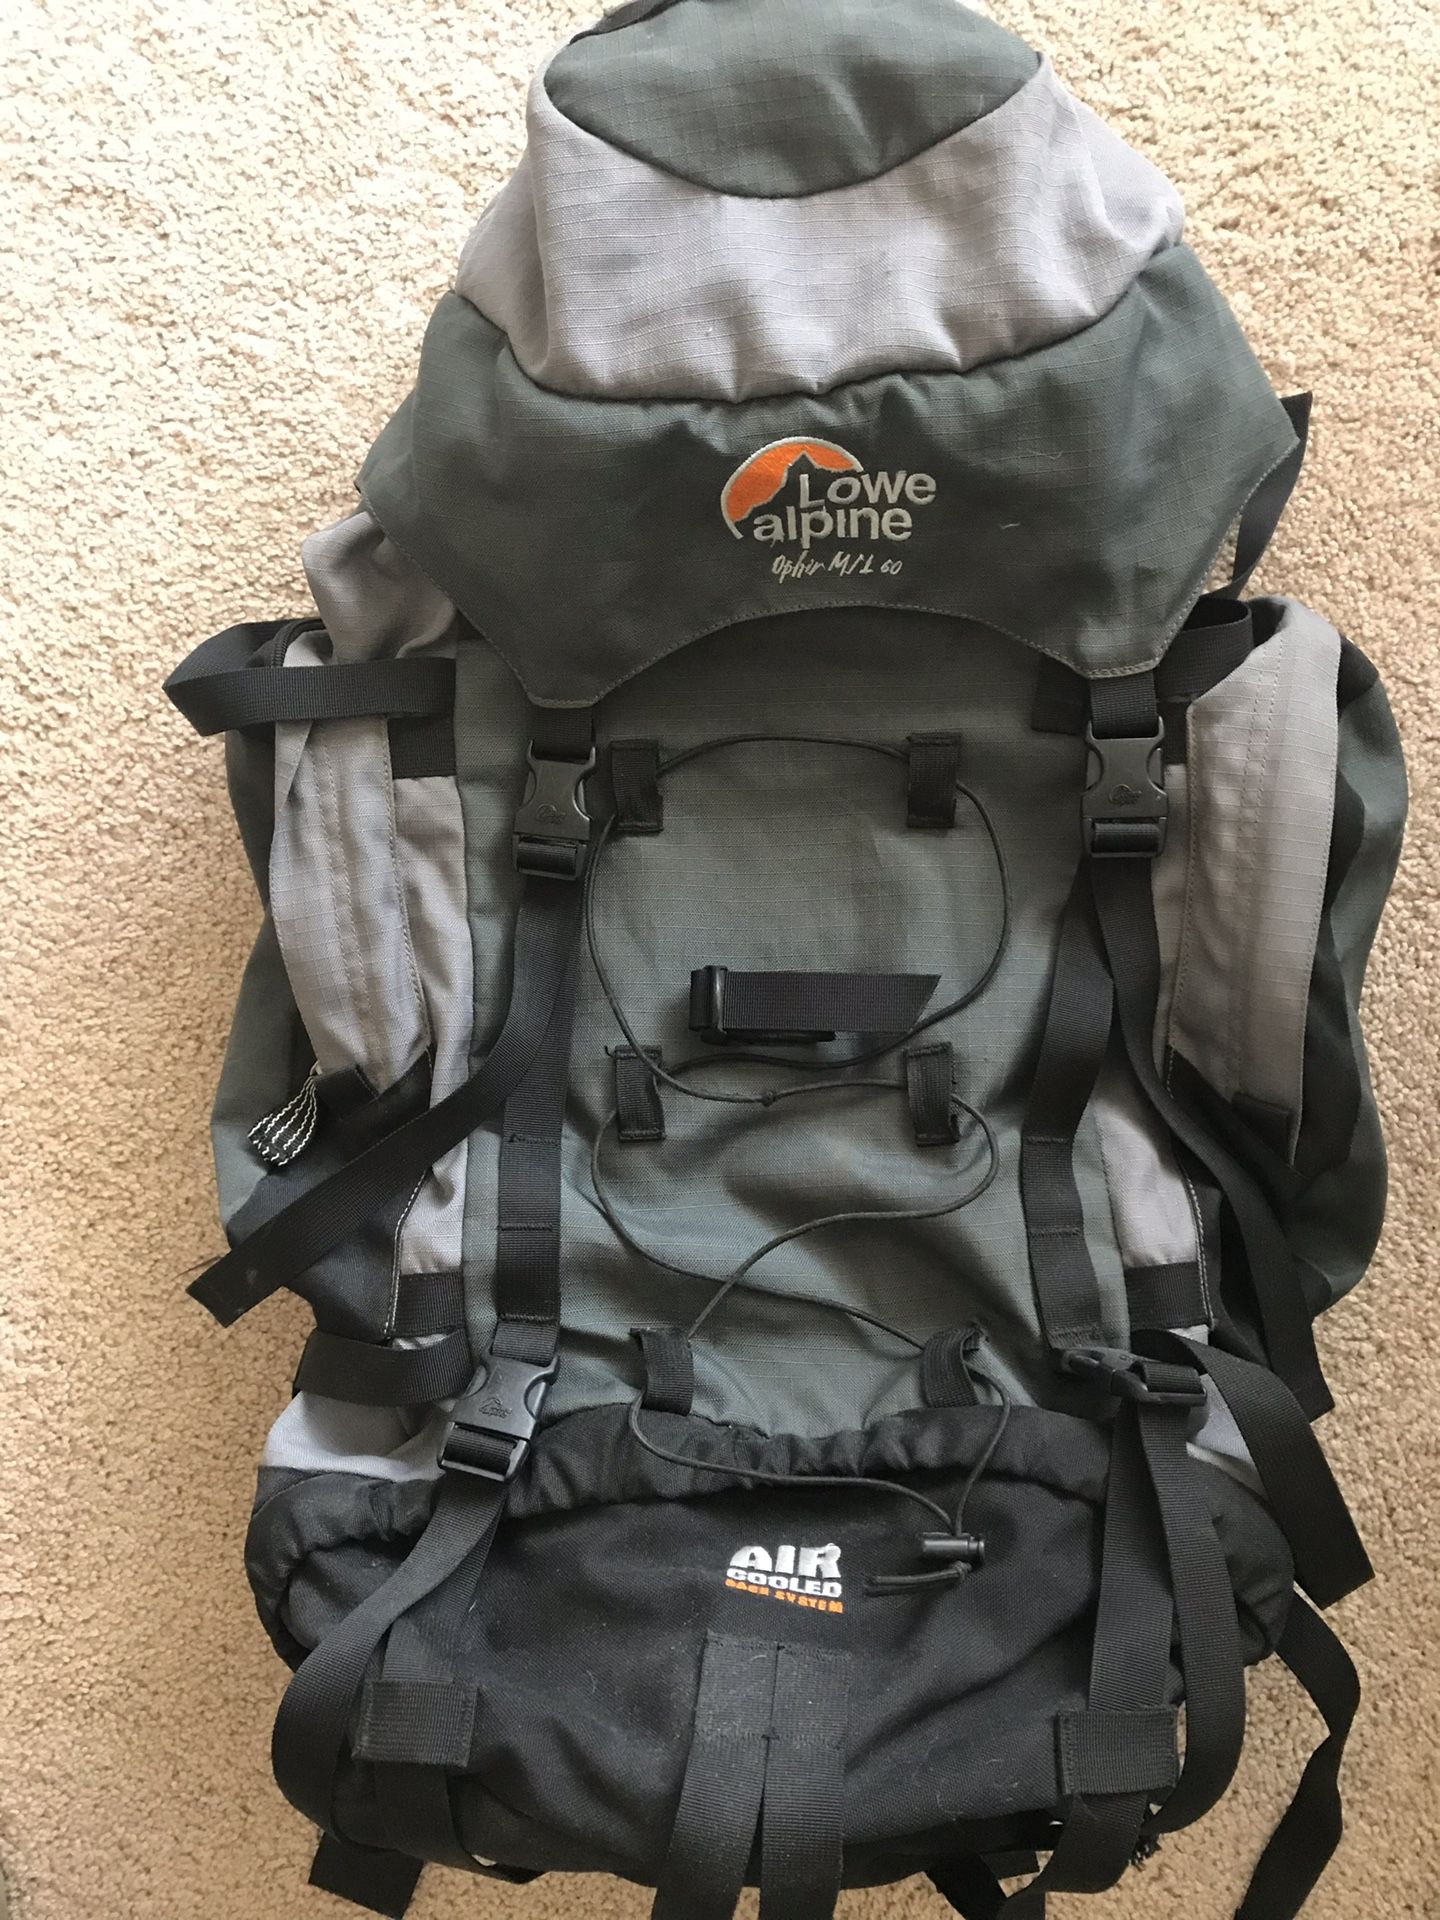 Lowe Alpine backpack - reinforced, excellent support